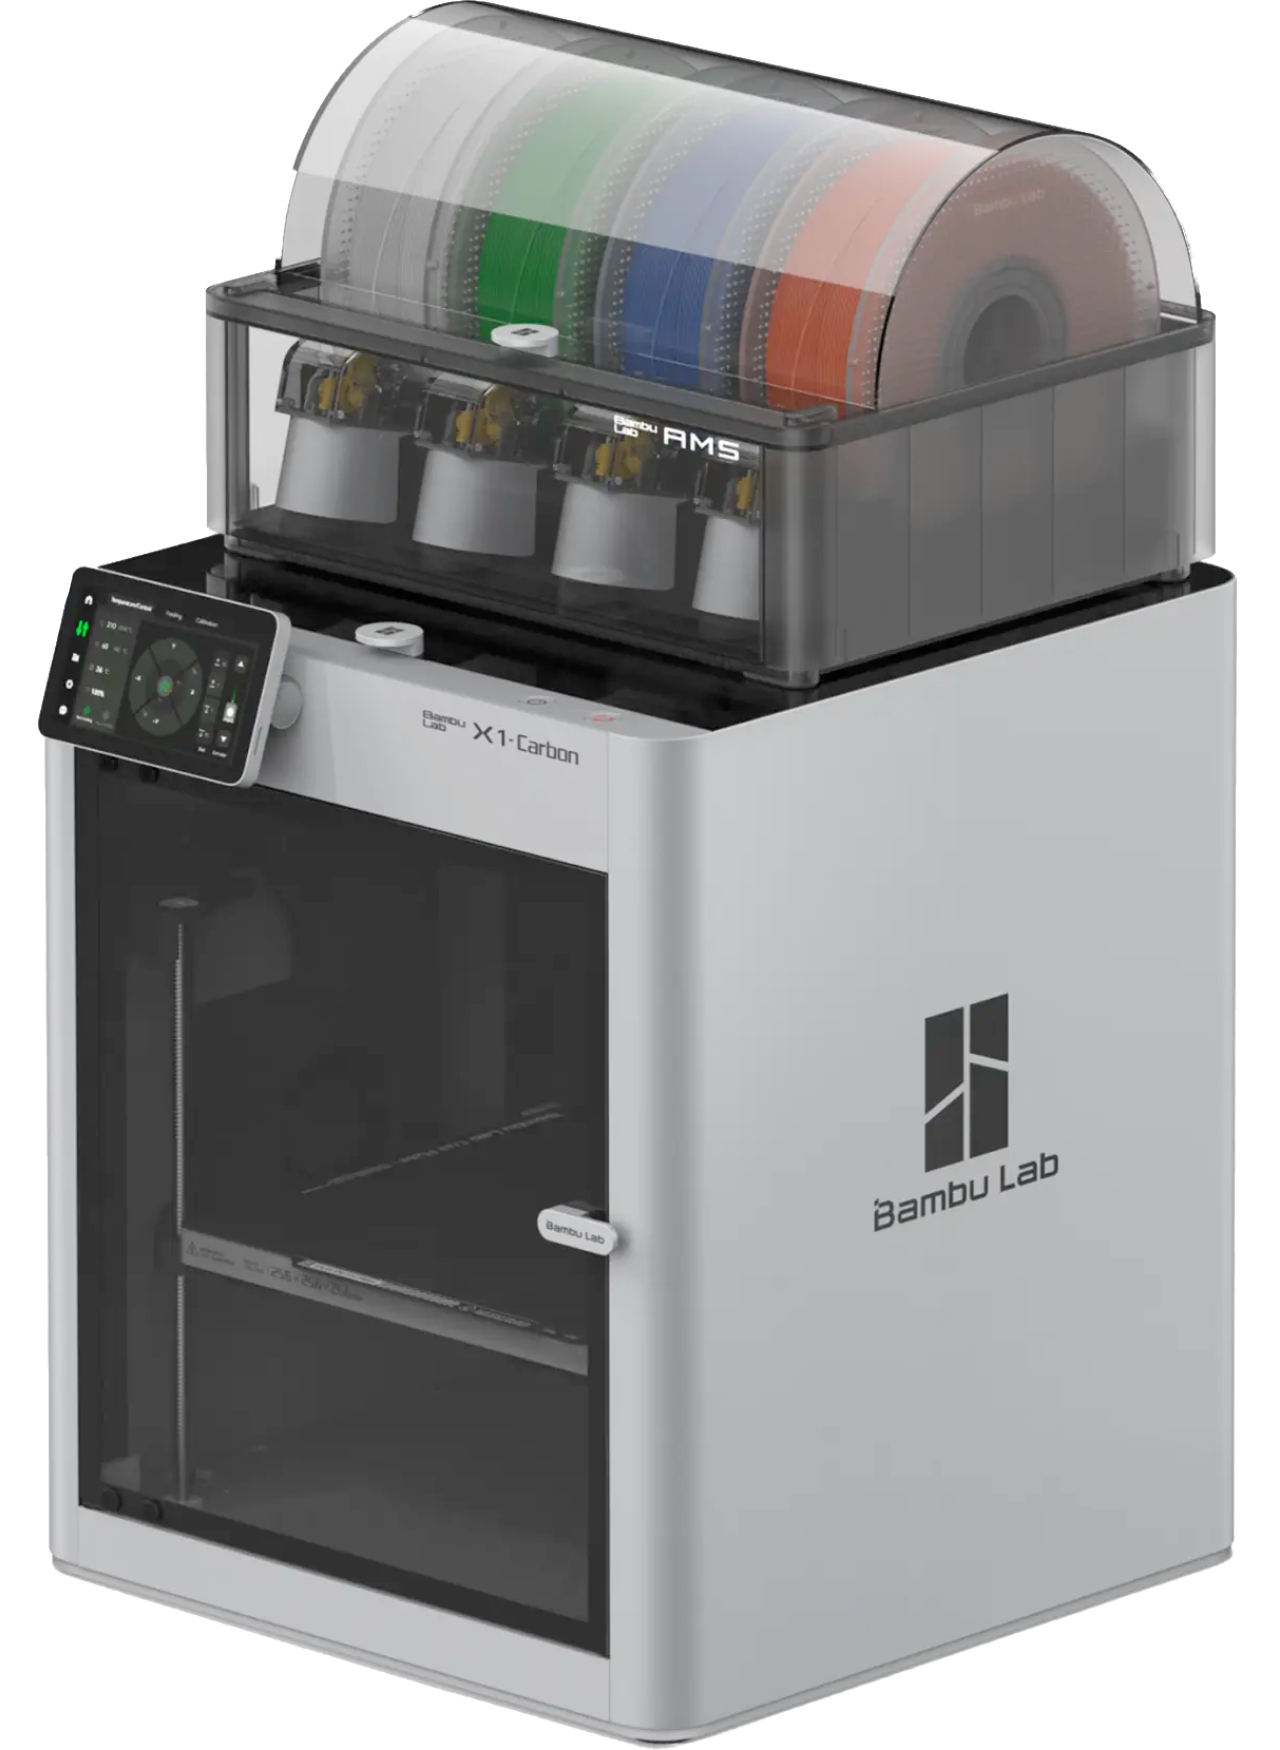 A picture of a modern 3D printer with a silver aluminium casing and a dark glass front door. On top there is a machine with four different colours of plastic filament that feeds the printer.